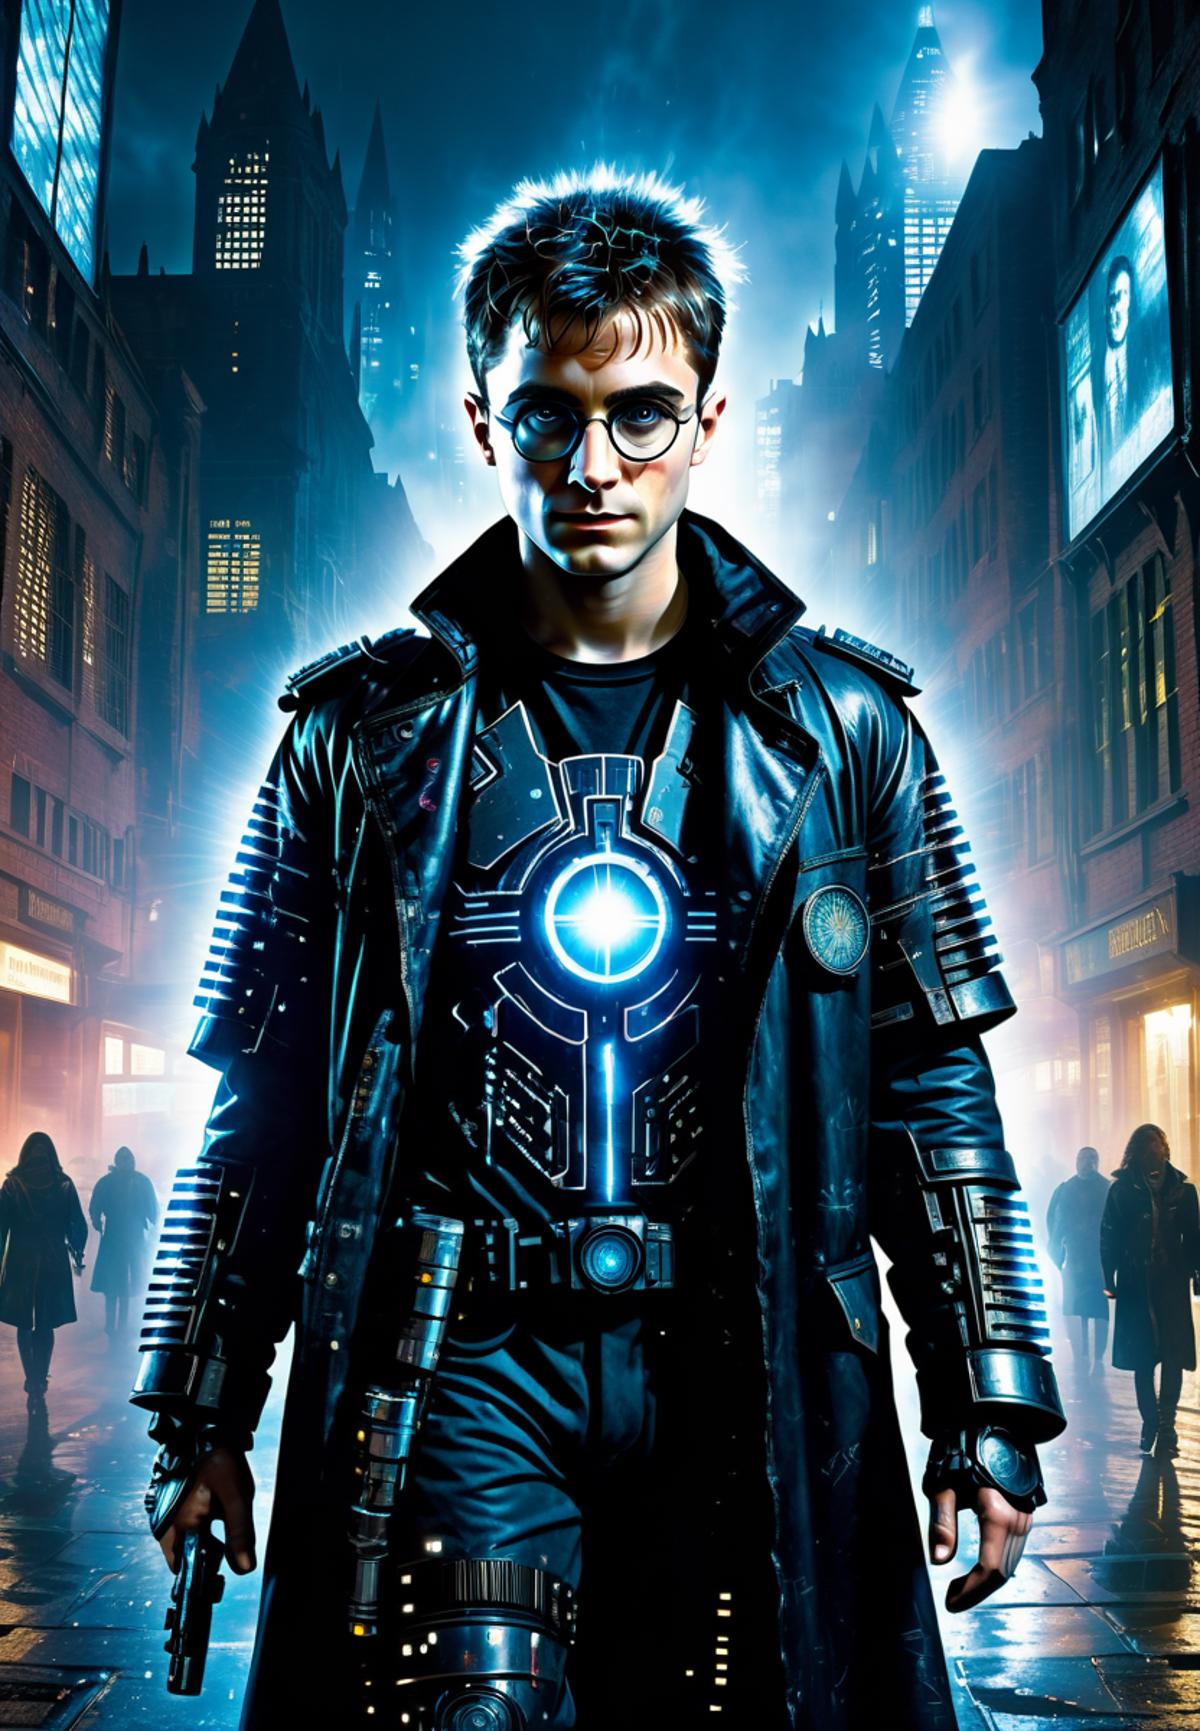 A man in a black jacket and glasses on a city street at night.